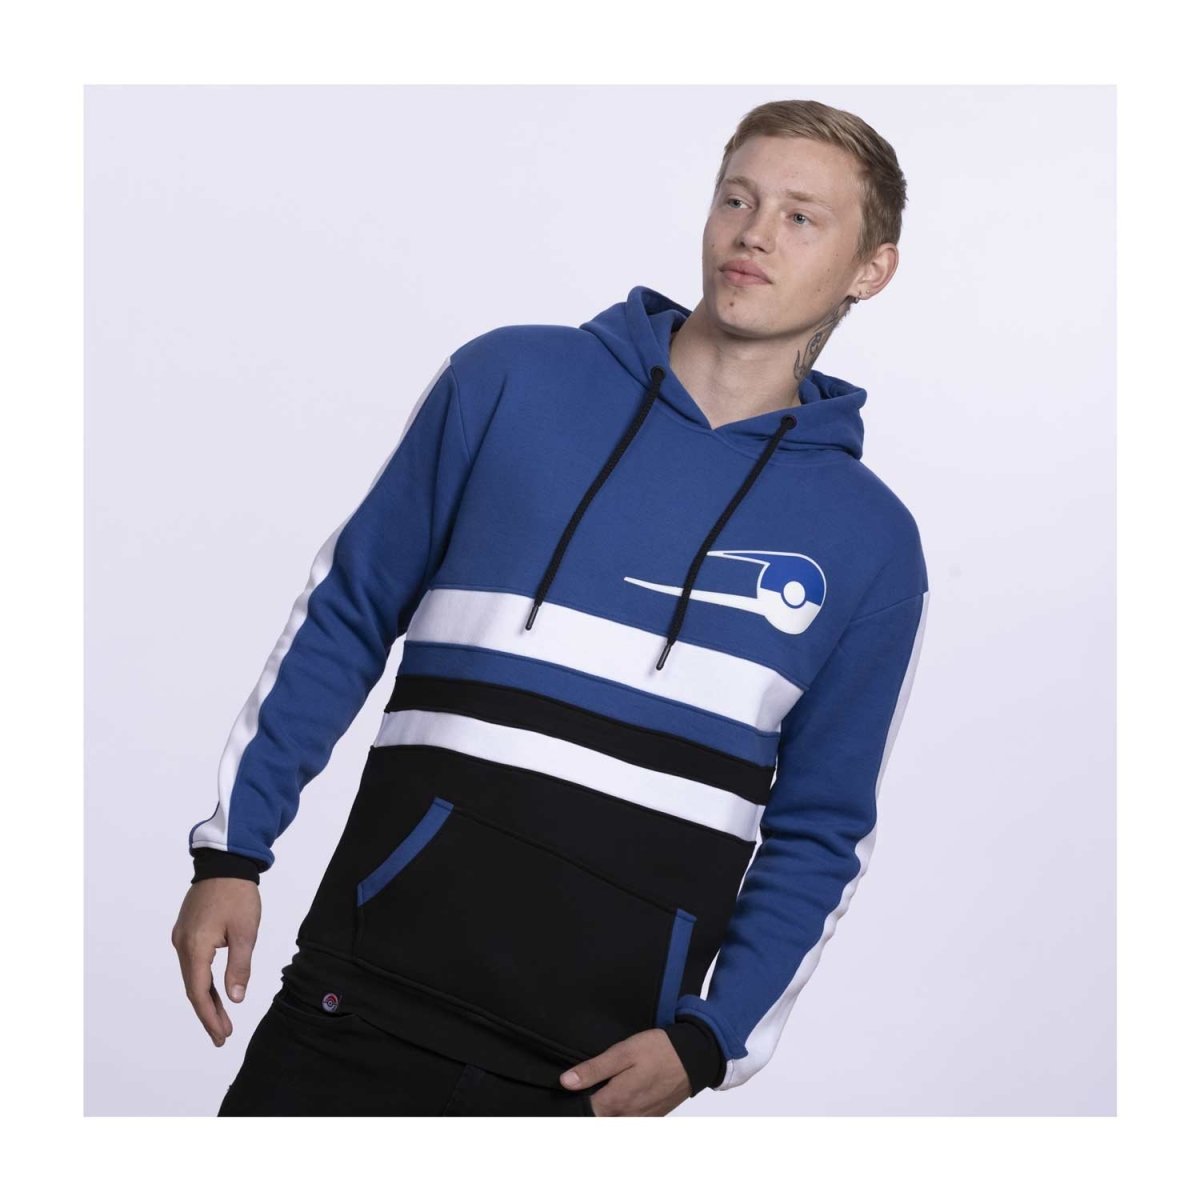 Pokémon Trading Card Game Live Blue Pullover Hoodie - Adult